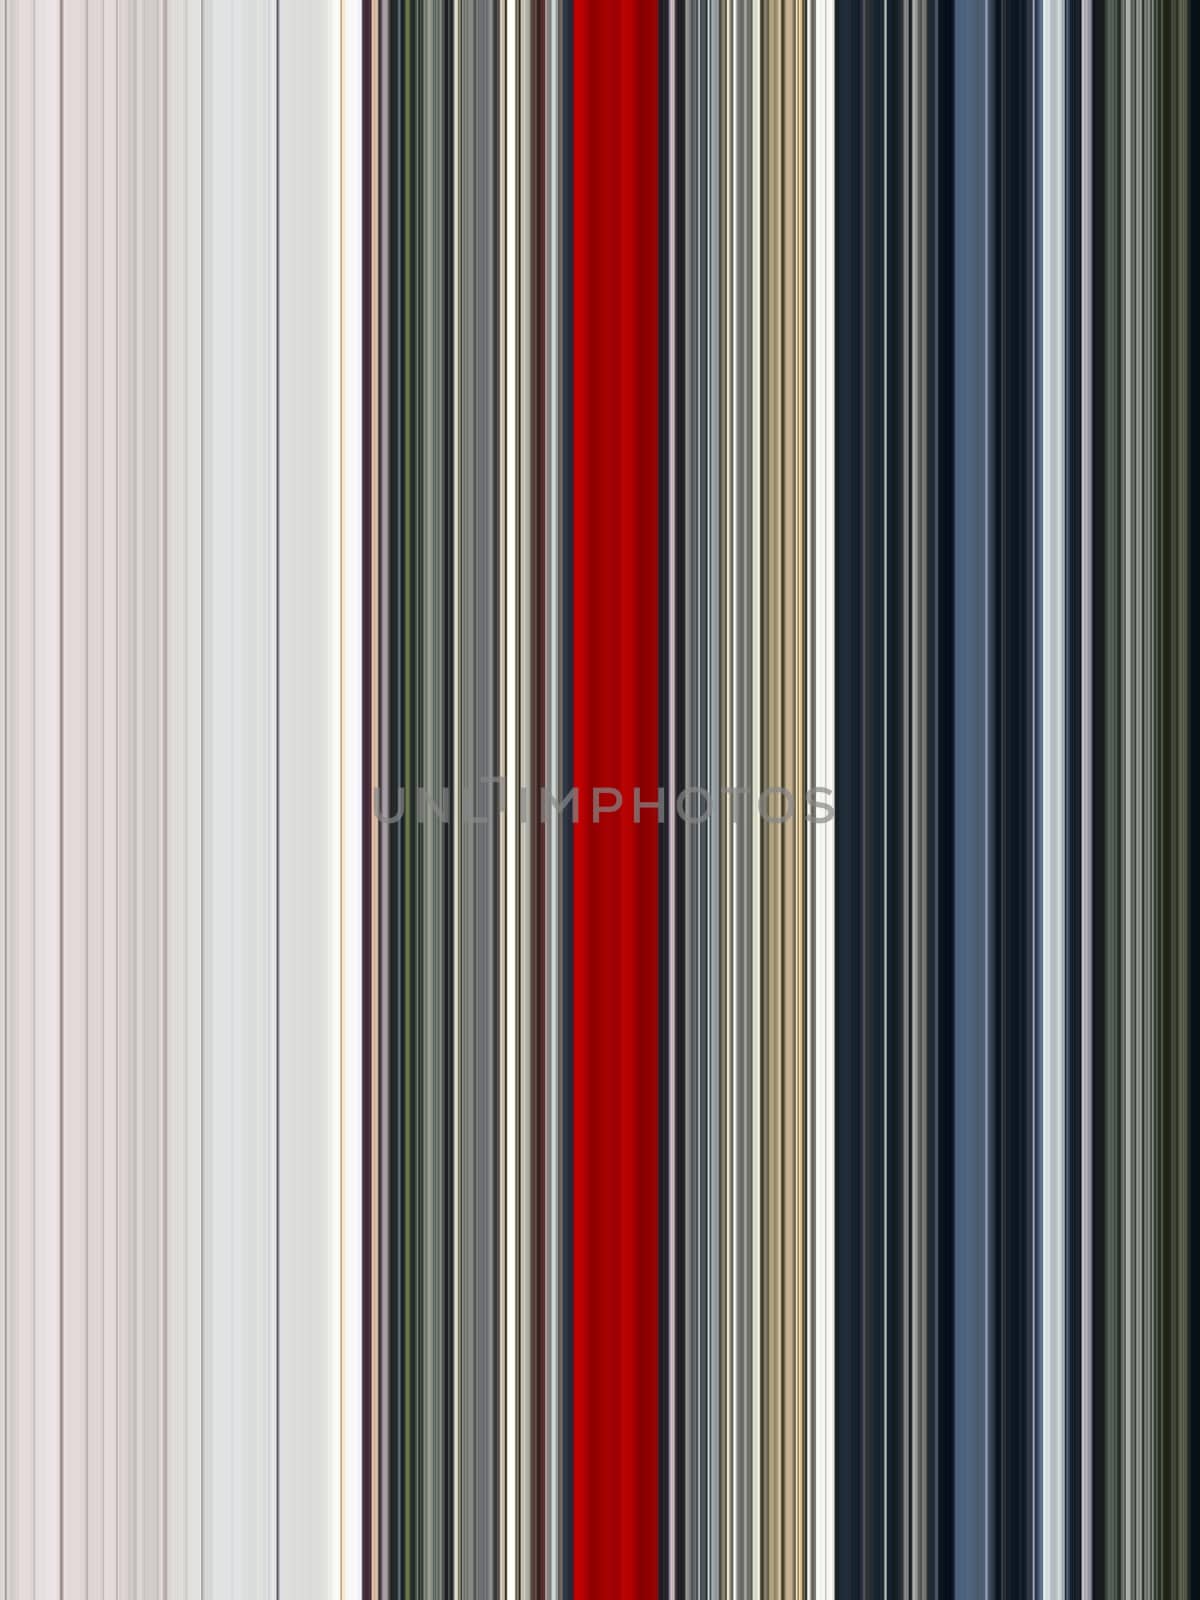 Multicolored vertical lines background by Bezdnatm